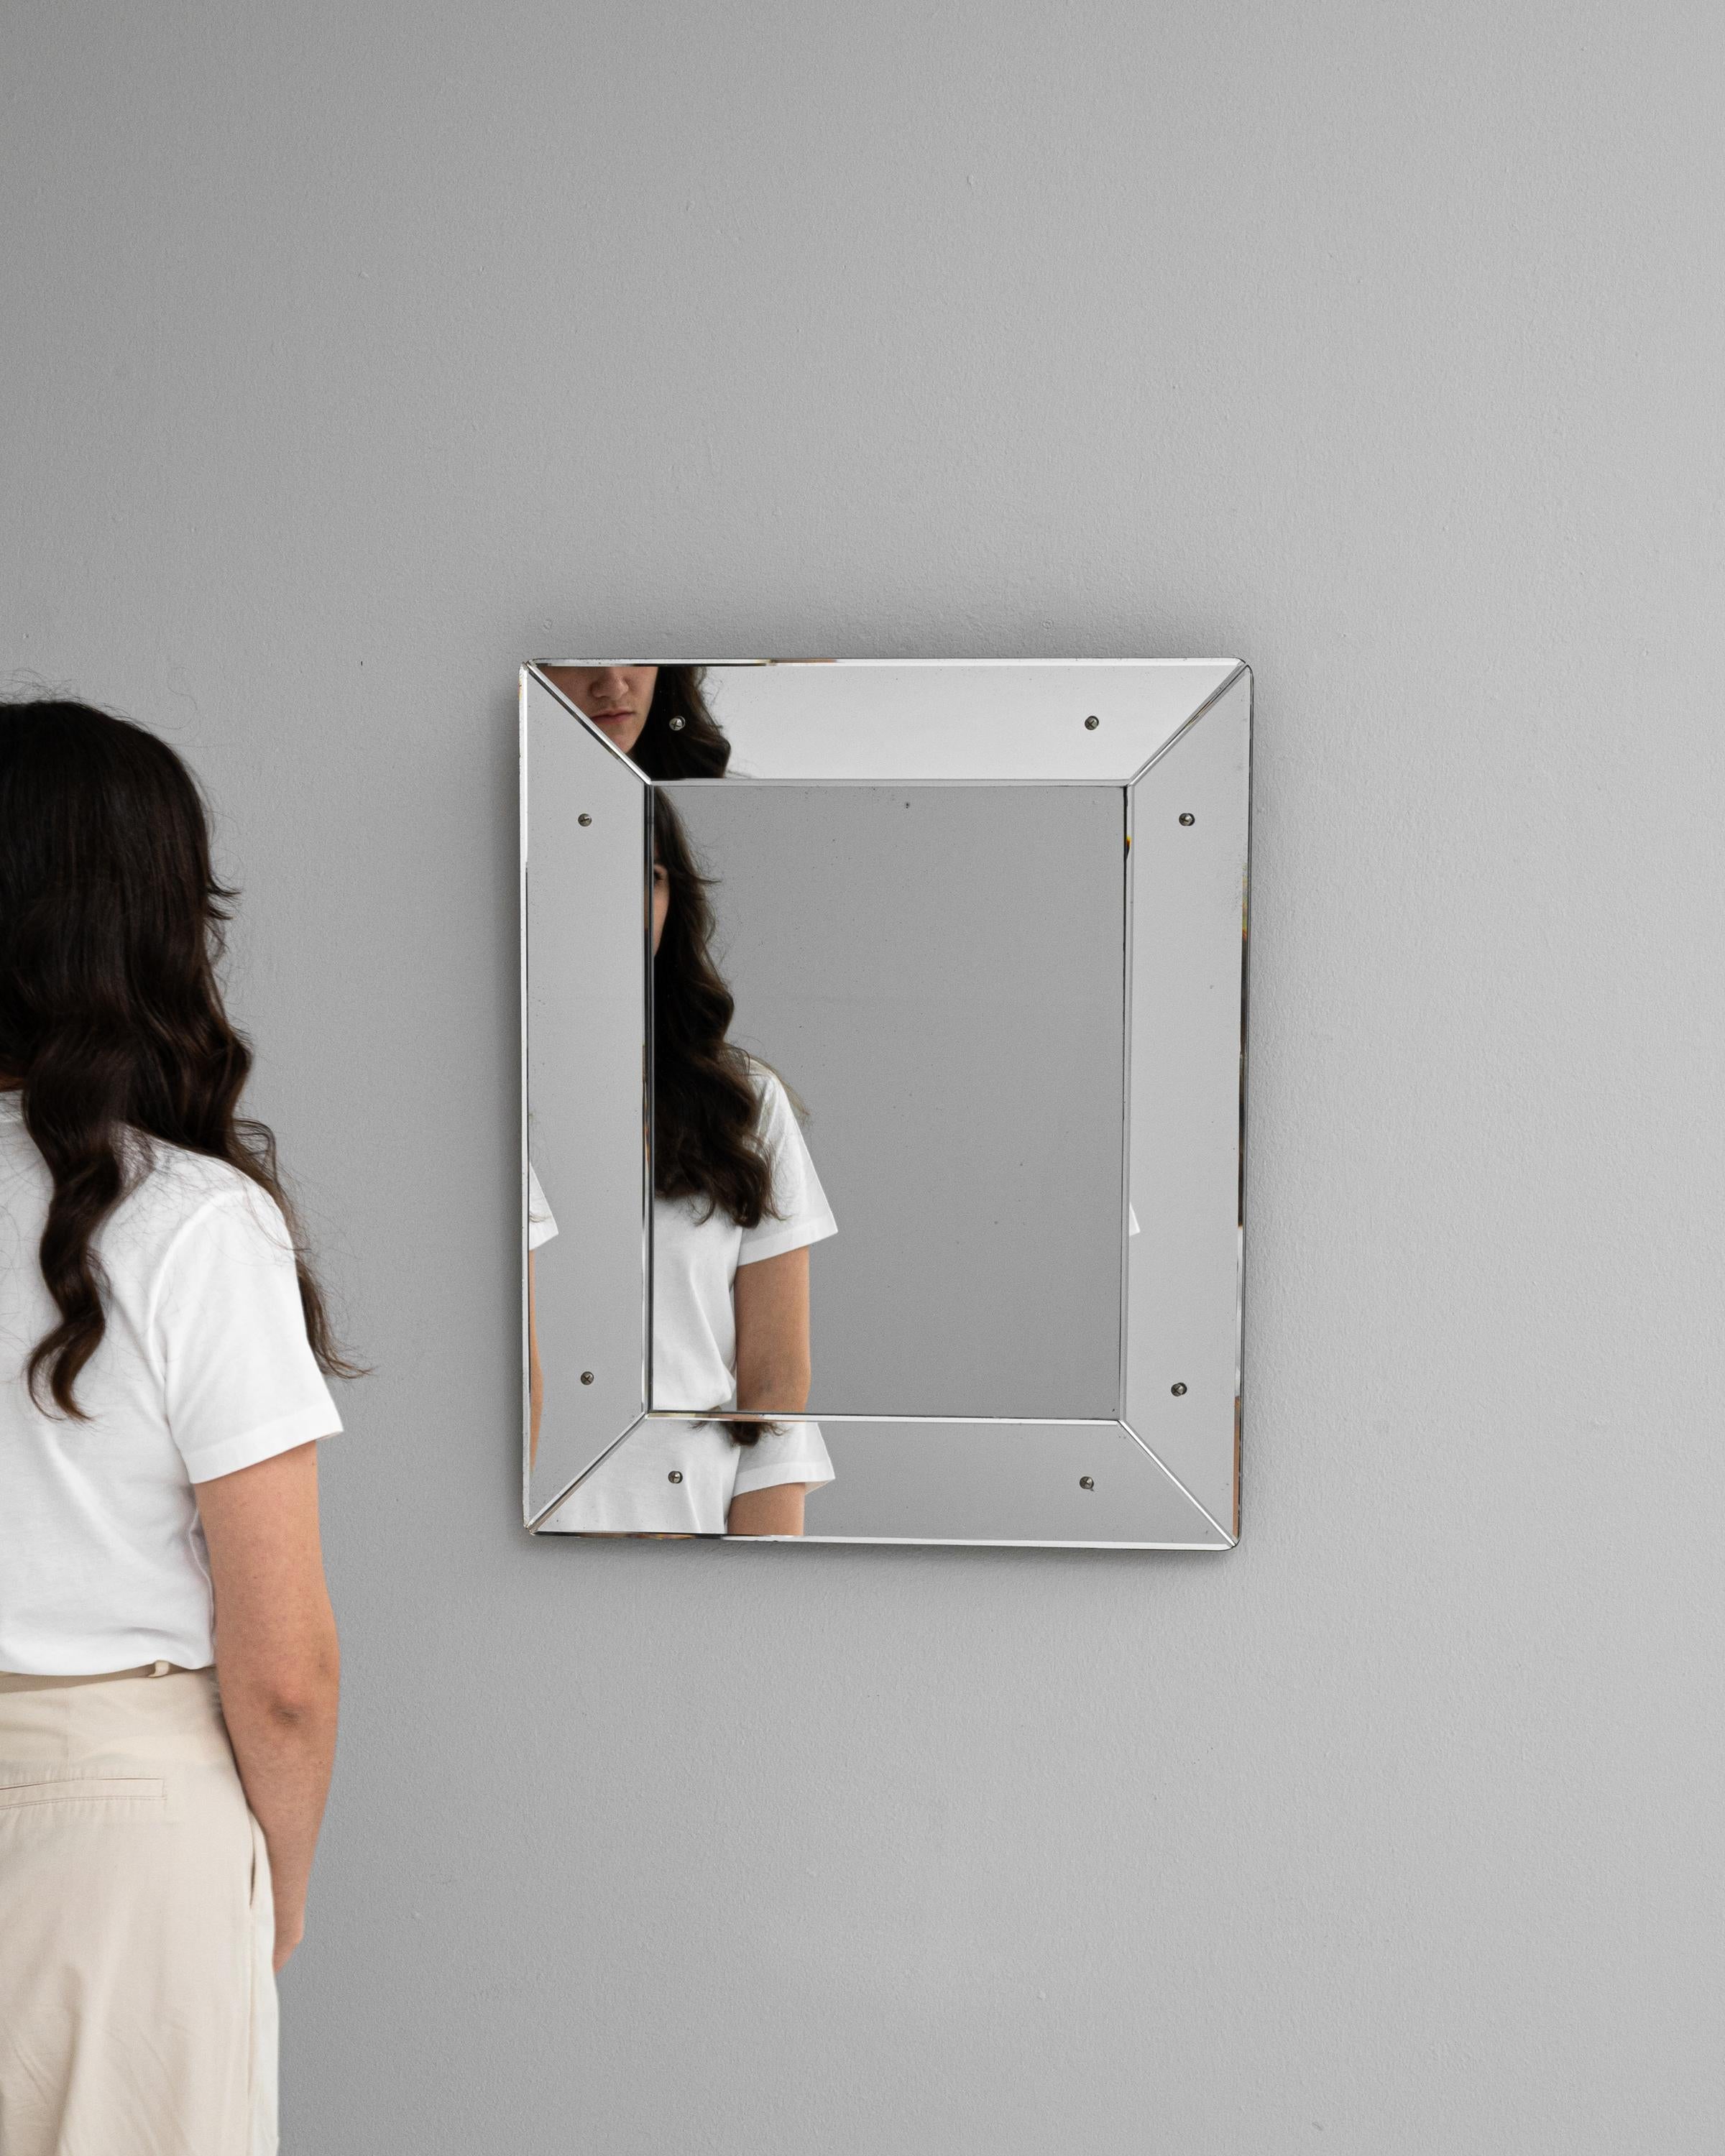 This 20th Century Italian Mirror showcases the sleek lines and understated elegance characteristic of Italian design. The frame, constructed with a metallic finish, lends a modern and minimalist aesthetic, while the visible screws add an industrial